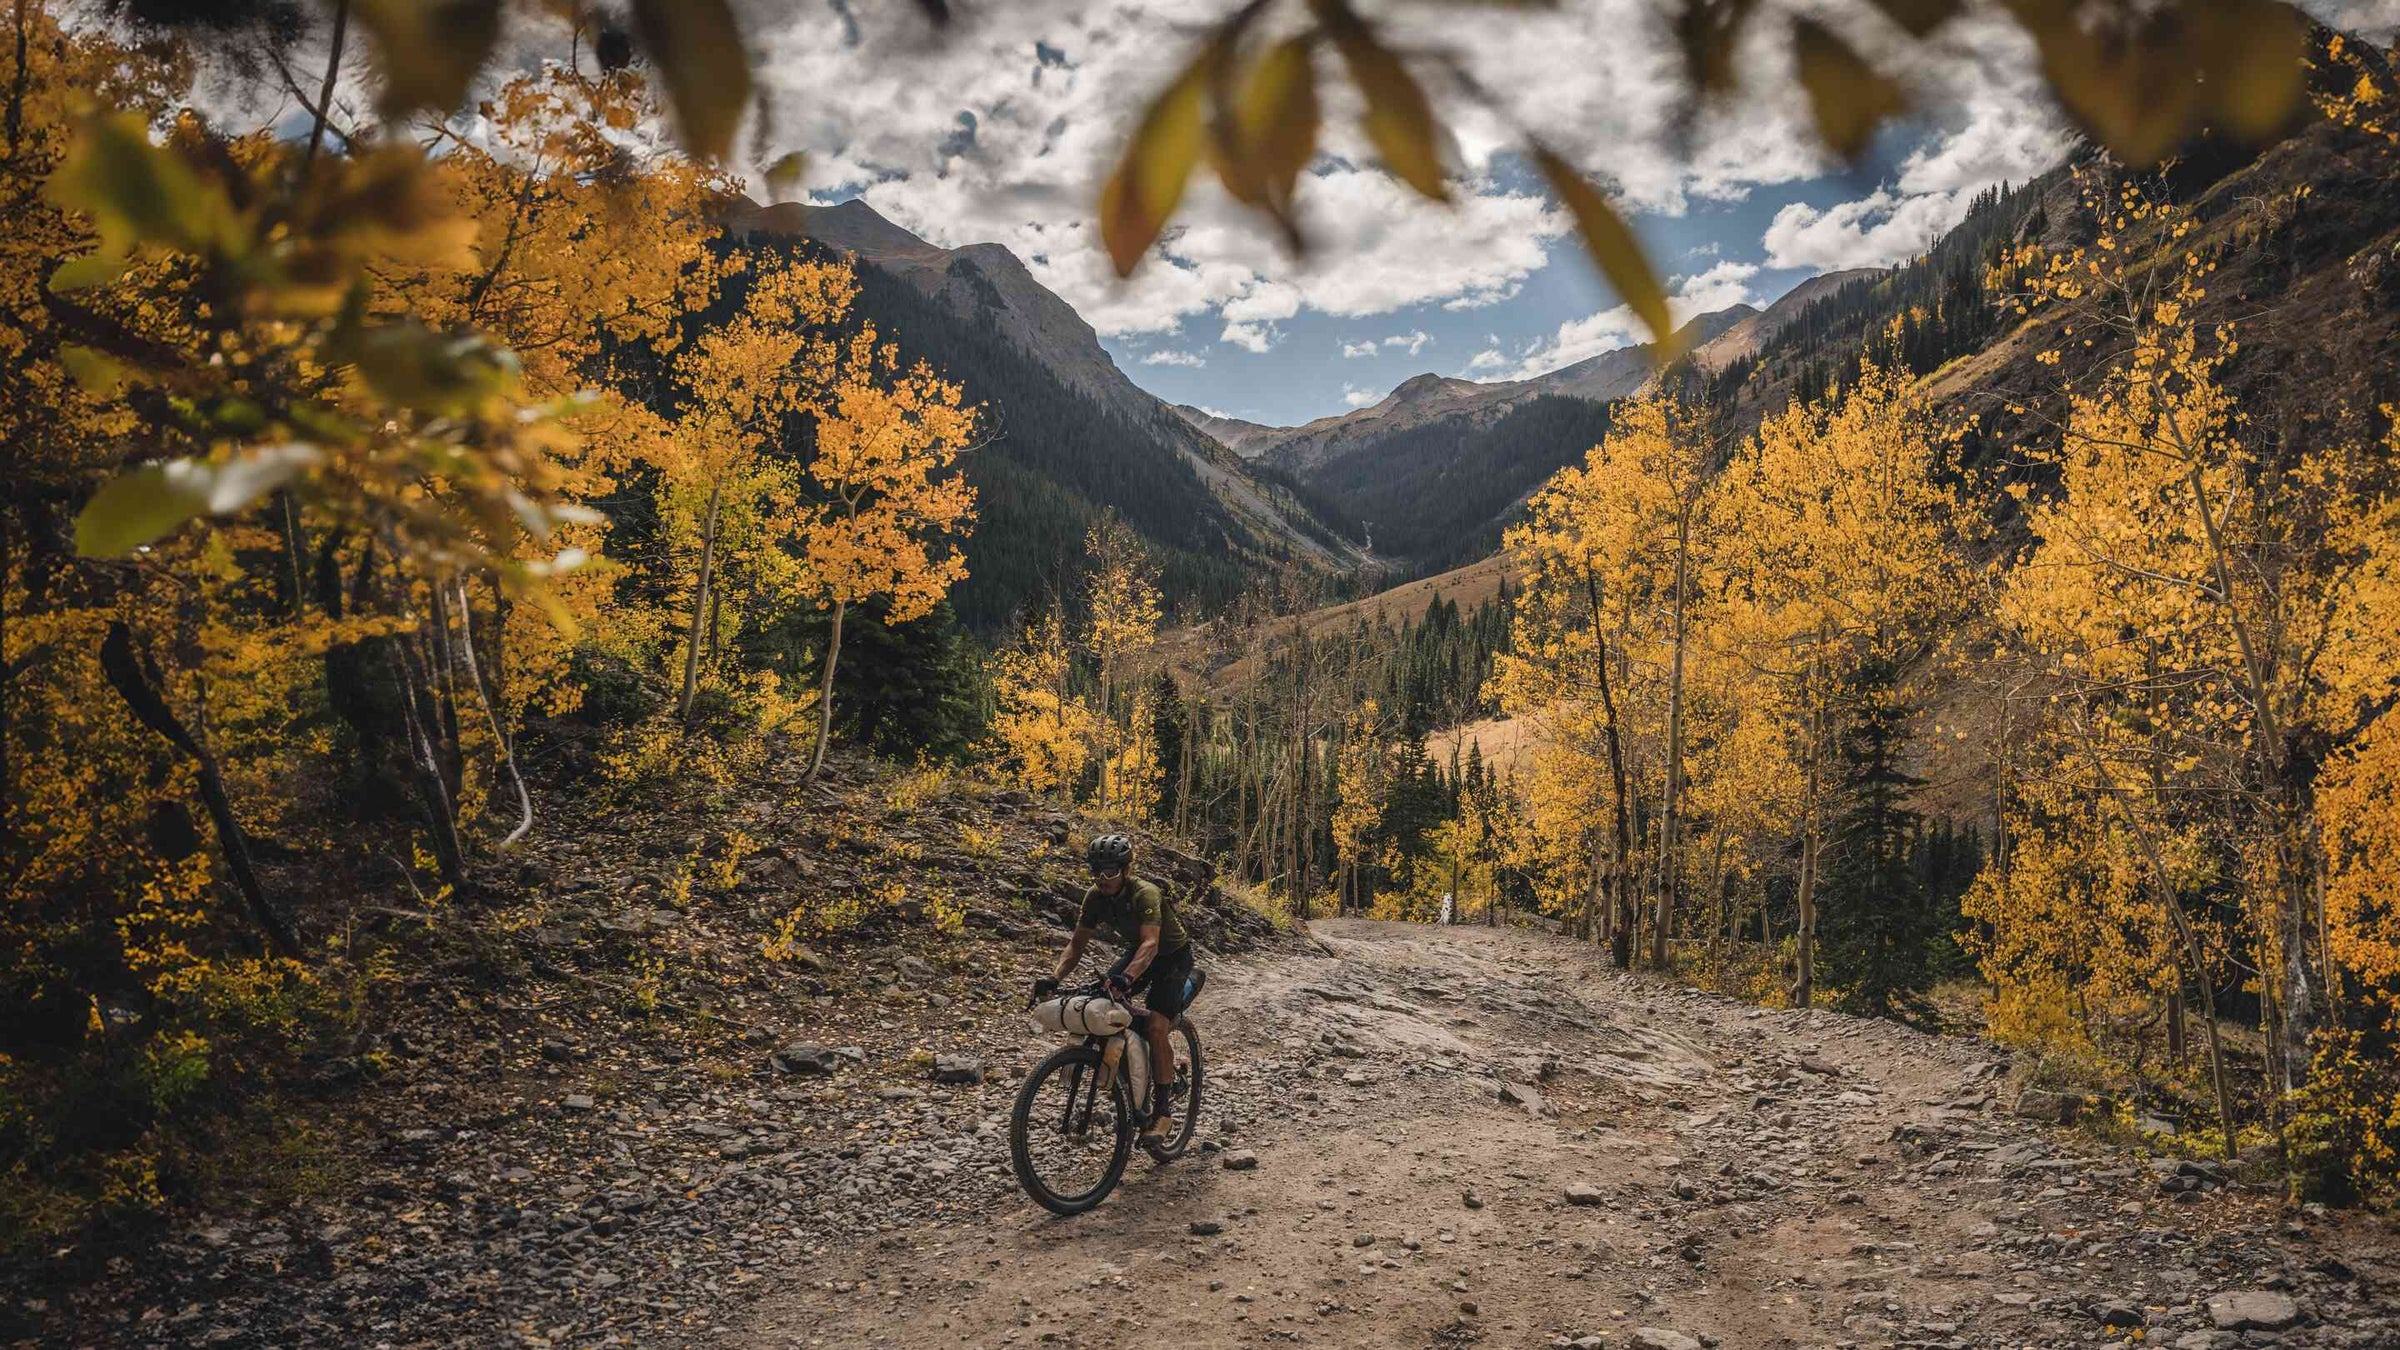 Bike Packing in Colorado with Leaves Changing